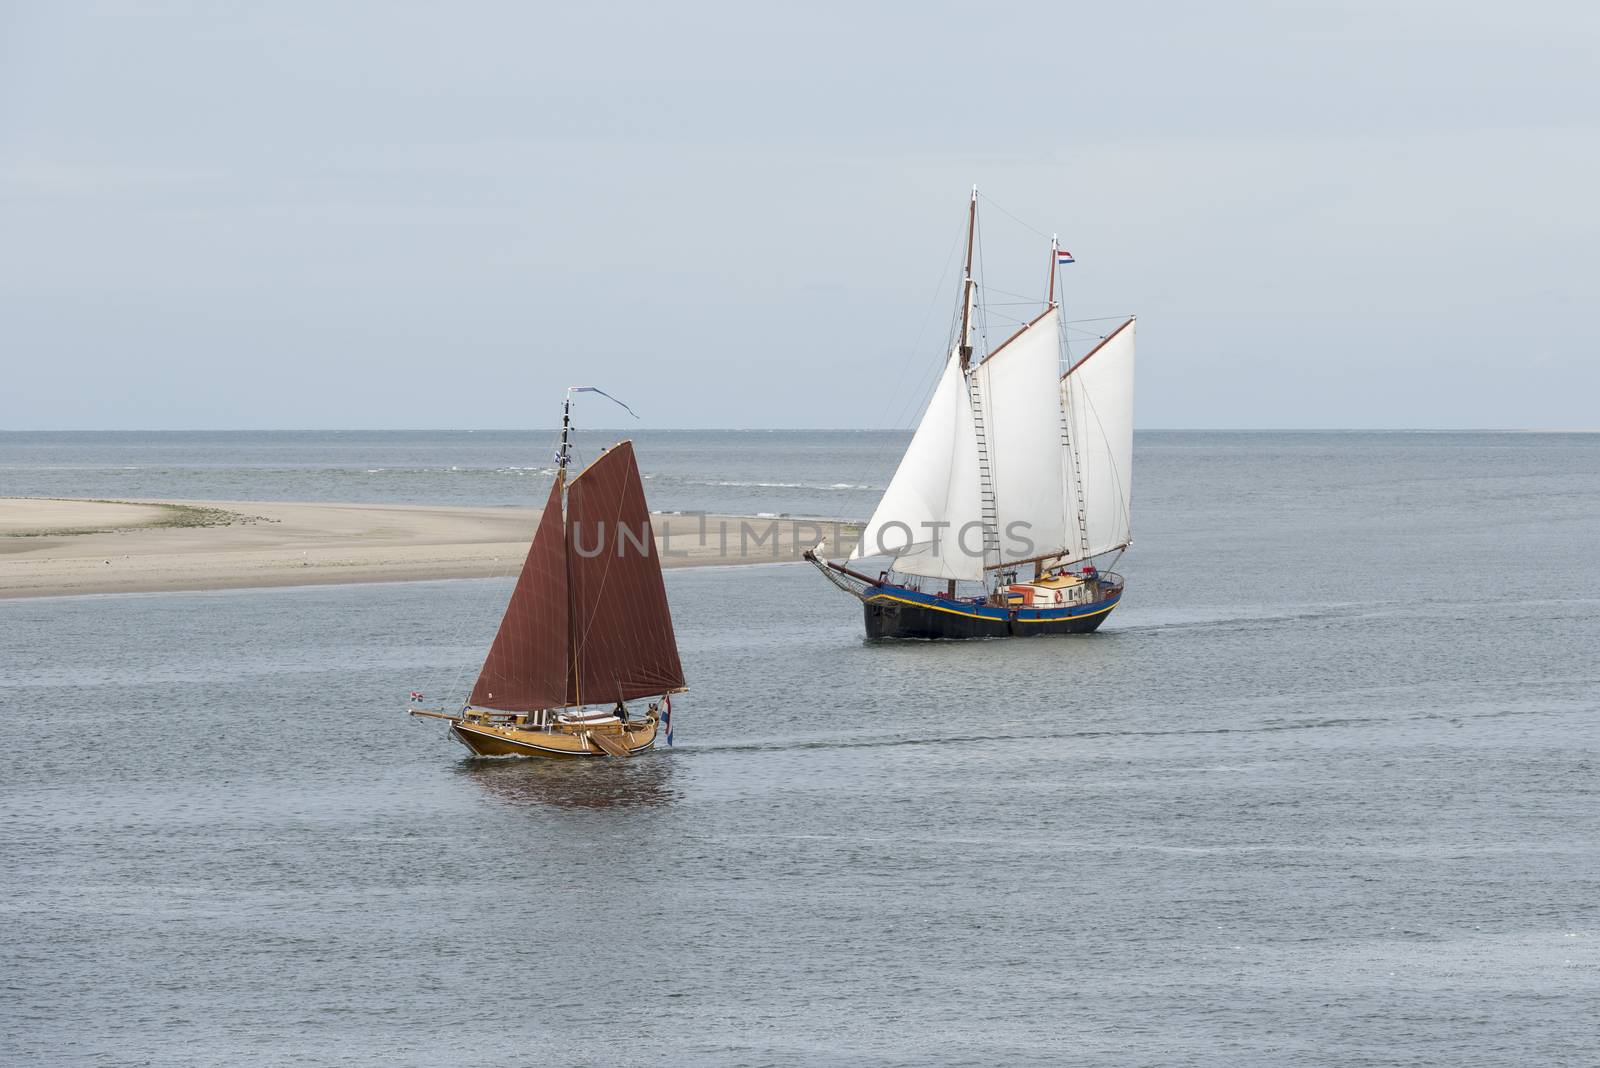 Sailing boats on the Wadden Sea near Vlieland
 by Tofotografie